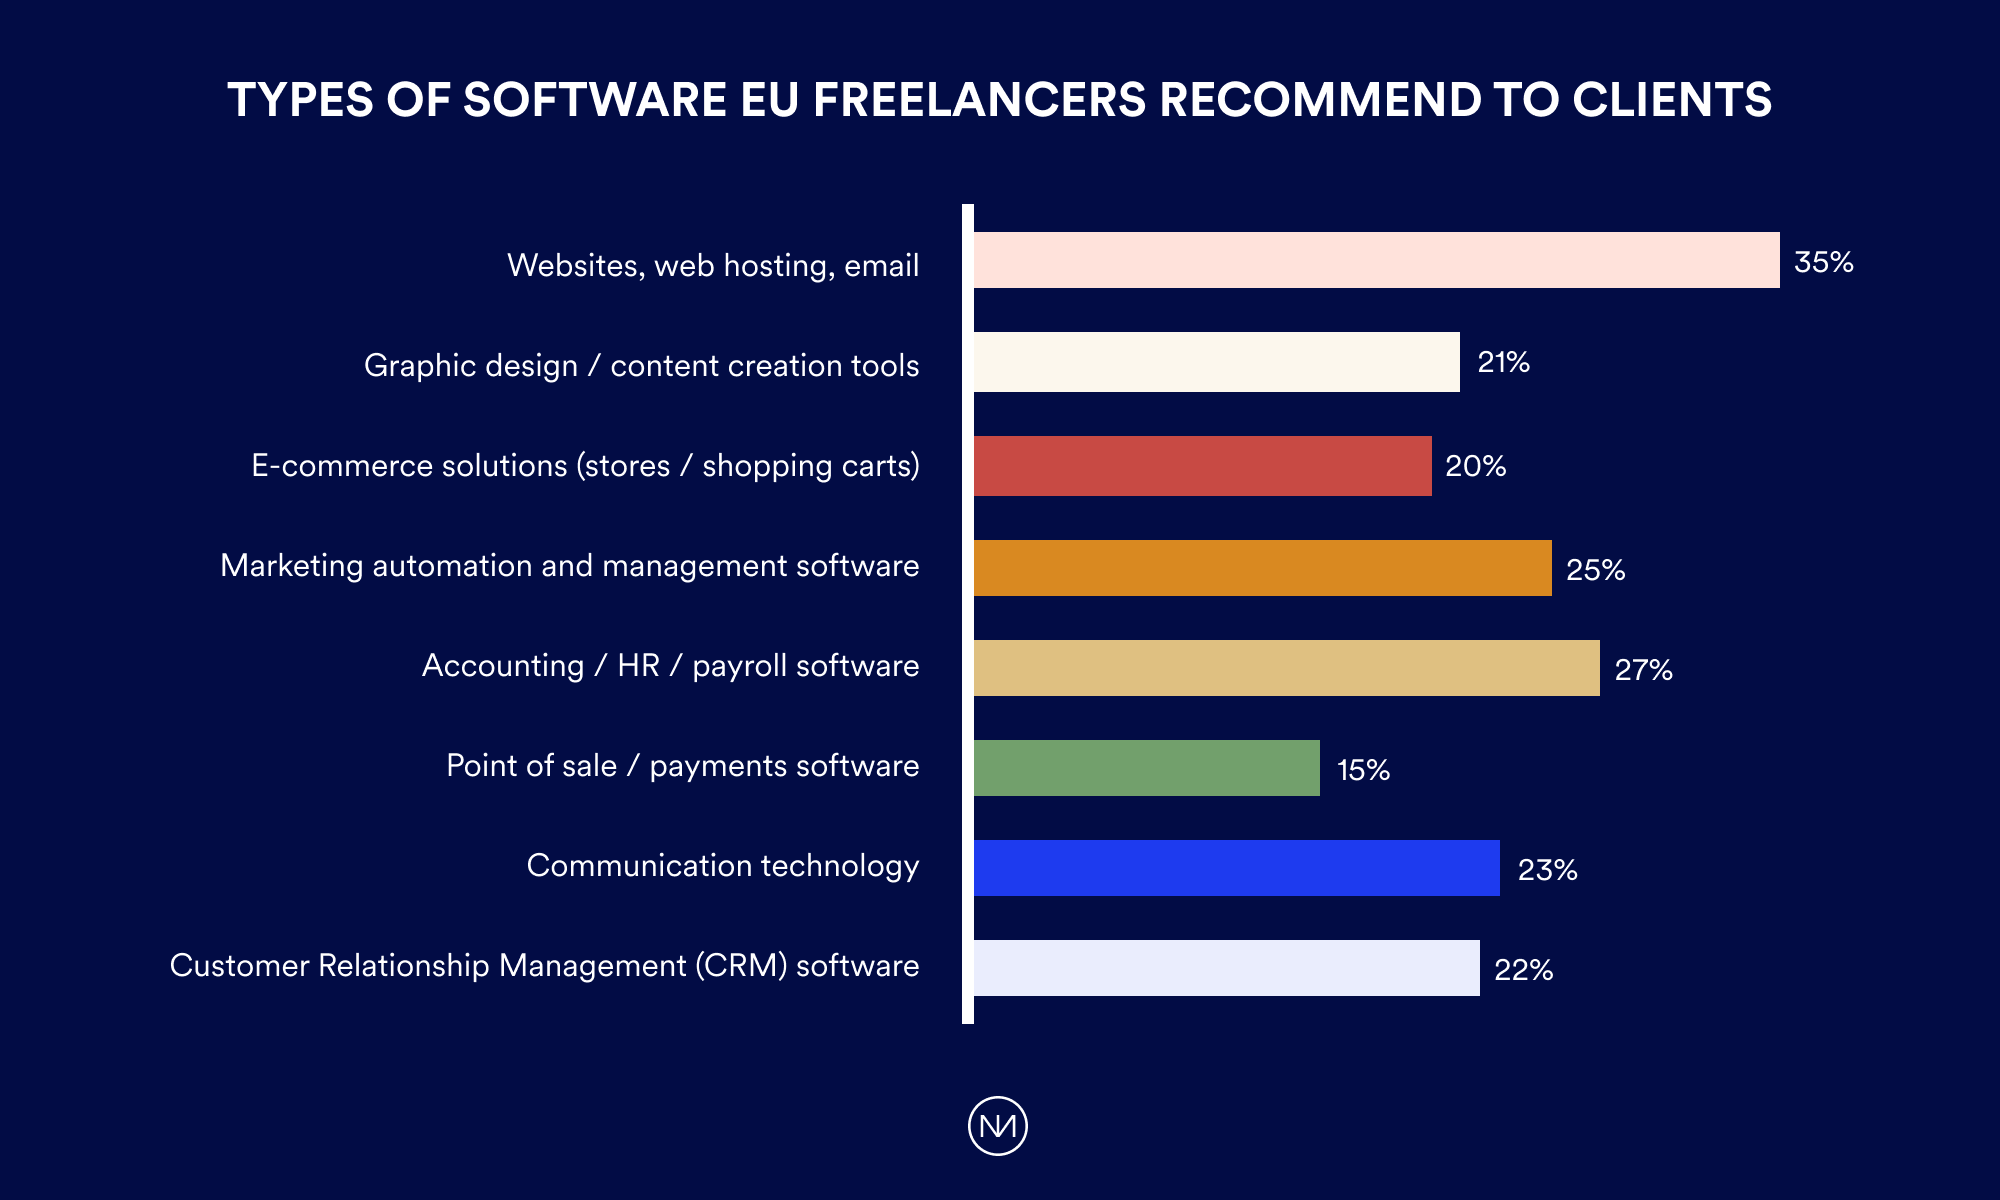 Types of Software EU Freelancers recommend to clients